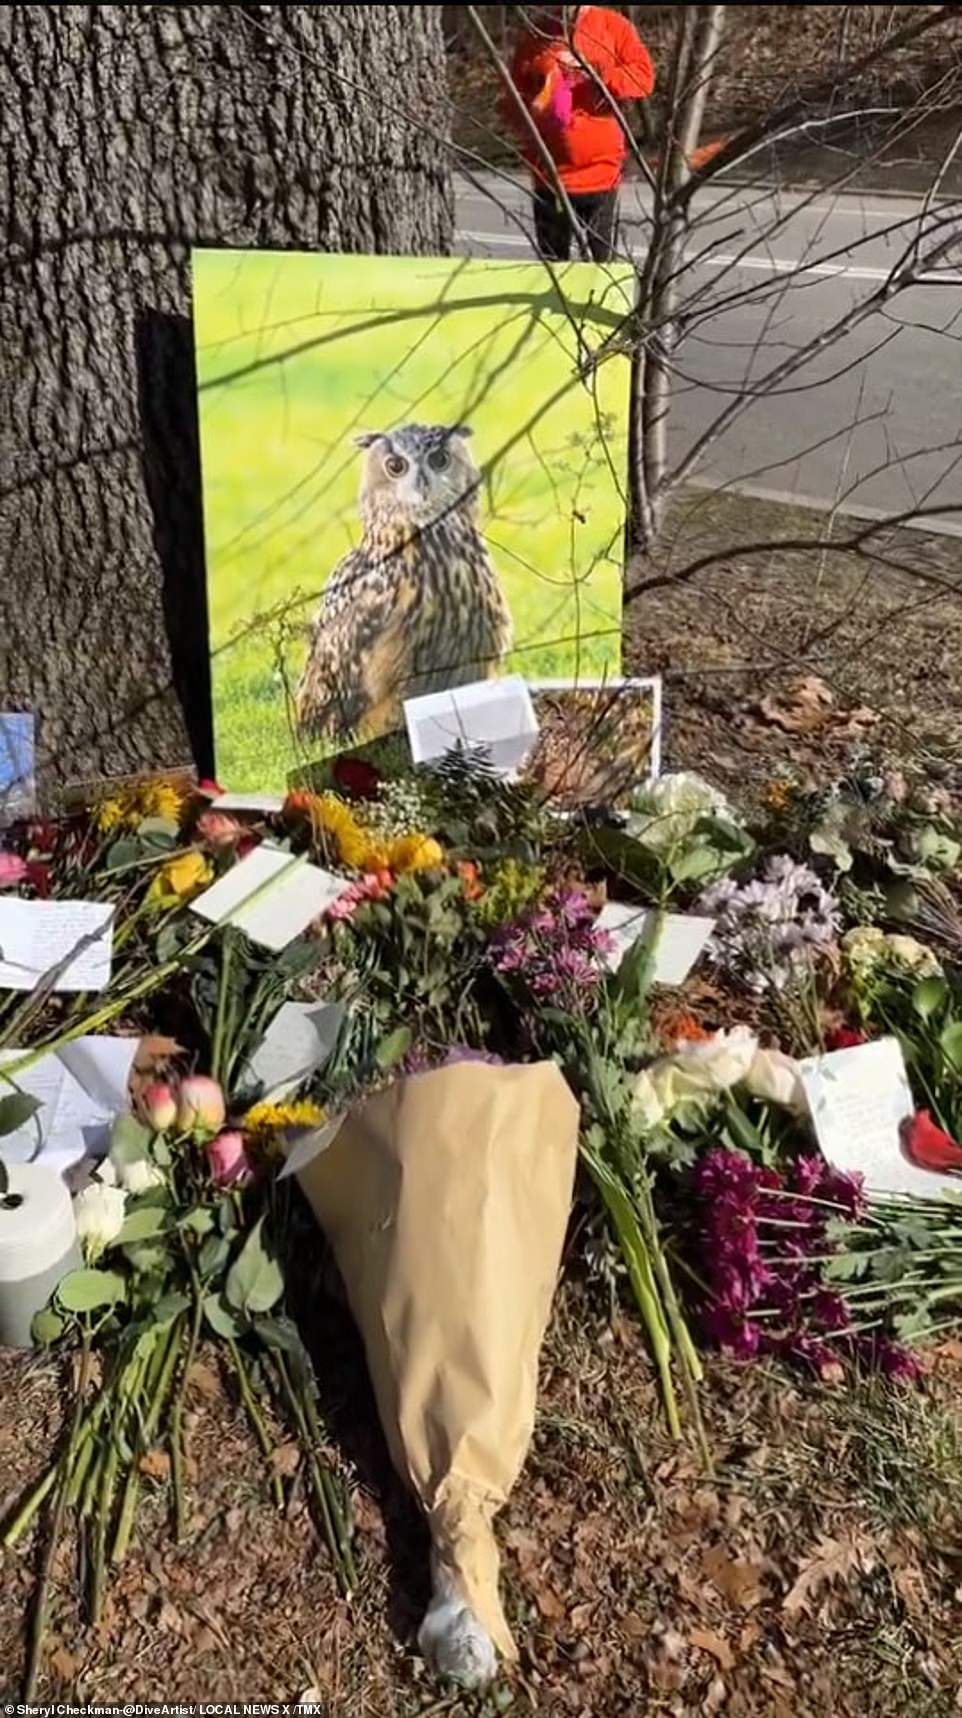 Hundreds gathered in Central Park on Sunday to celebrate Flaco the Owl, New York City's favorite feathered friend, who tragically died after colliding with an Upper West Side building earlier this month